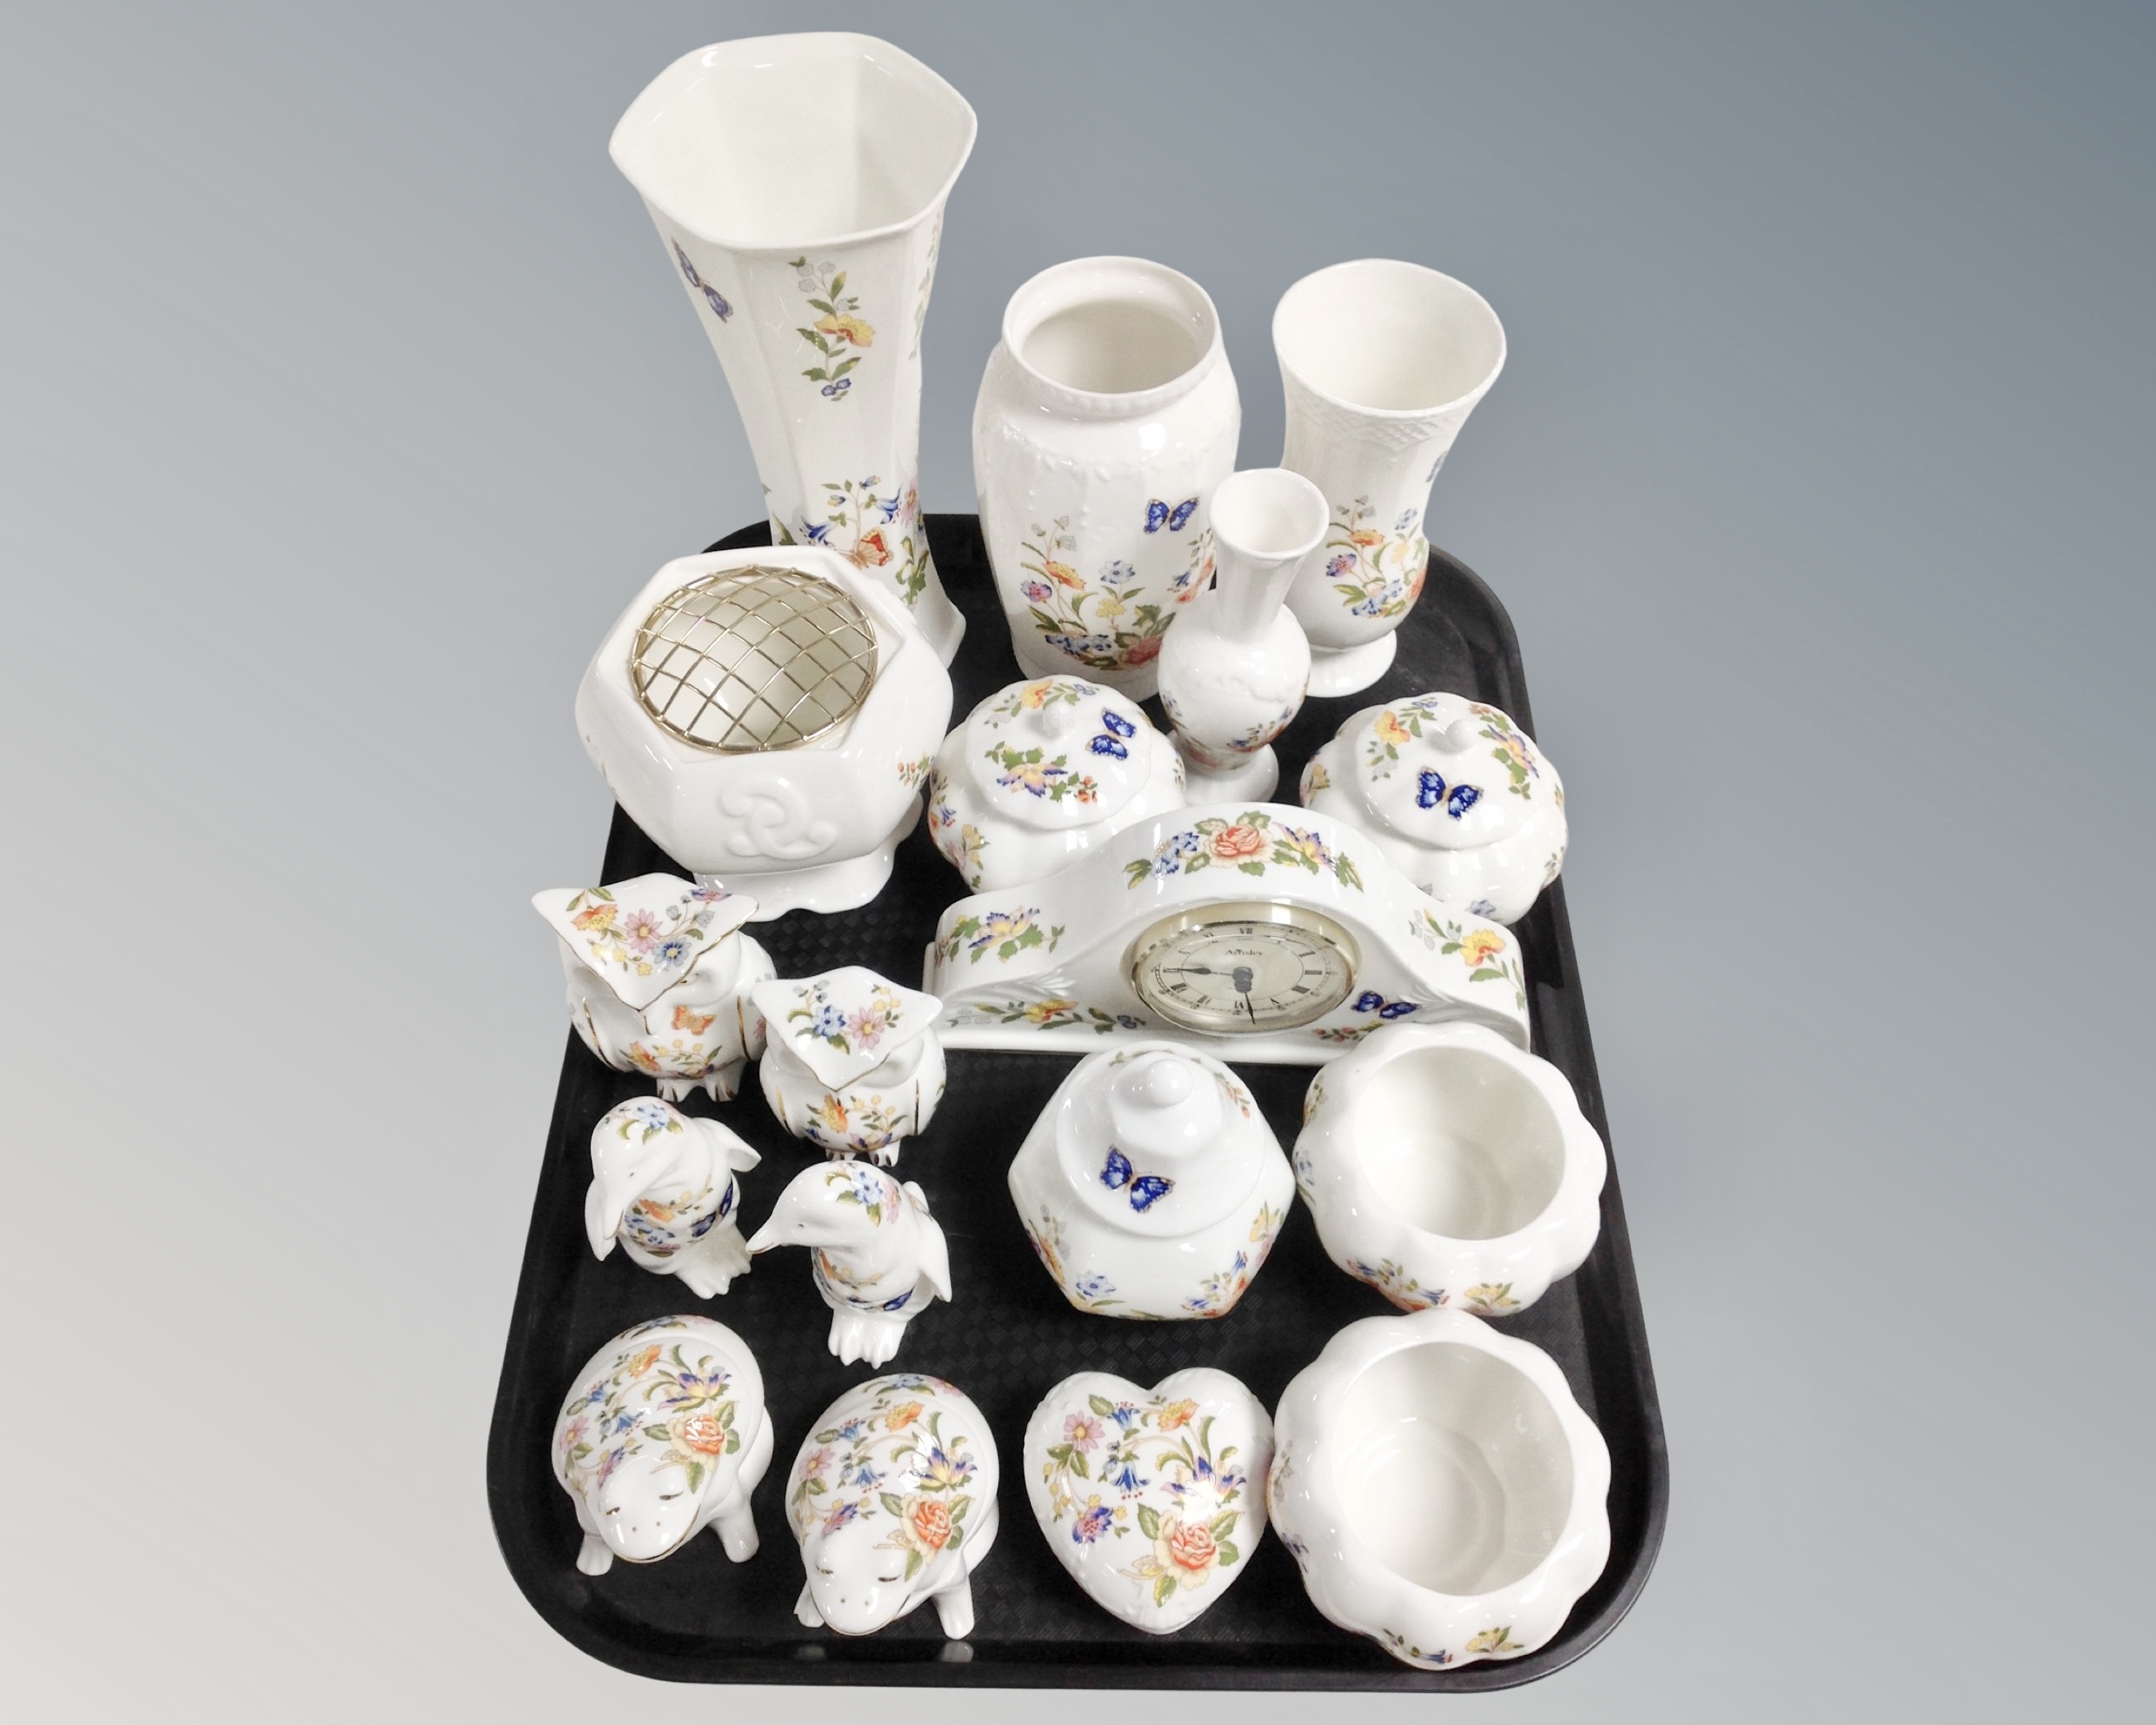 A quantity of Aynsley Cottage Garden trinkets and china ornaments,